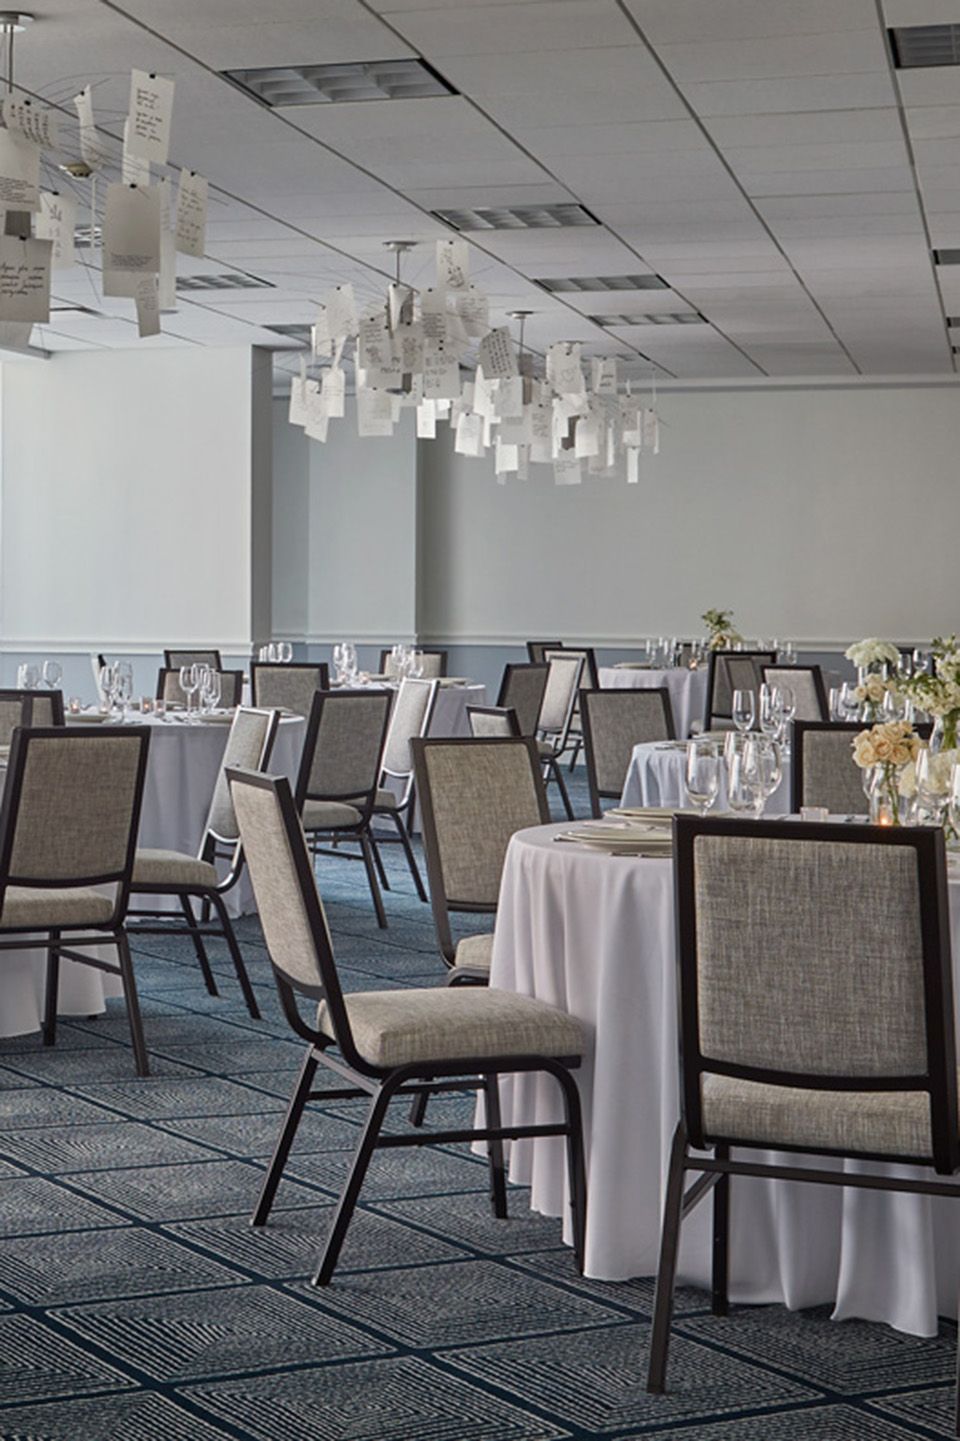 Hotel Event Spaces For Meetings & Weddings